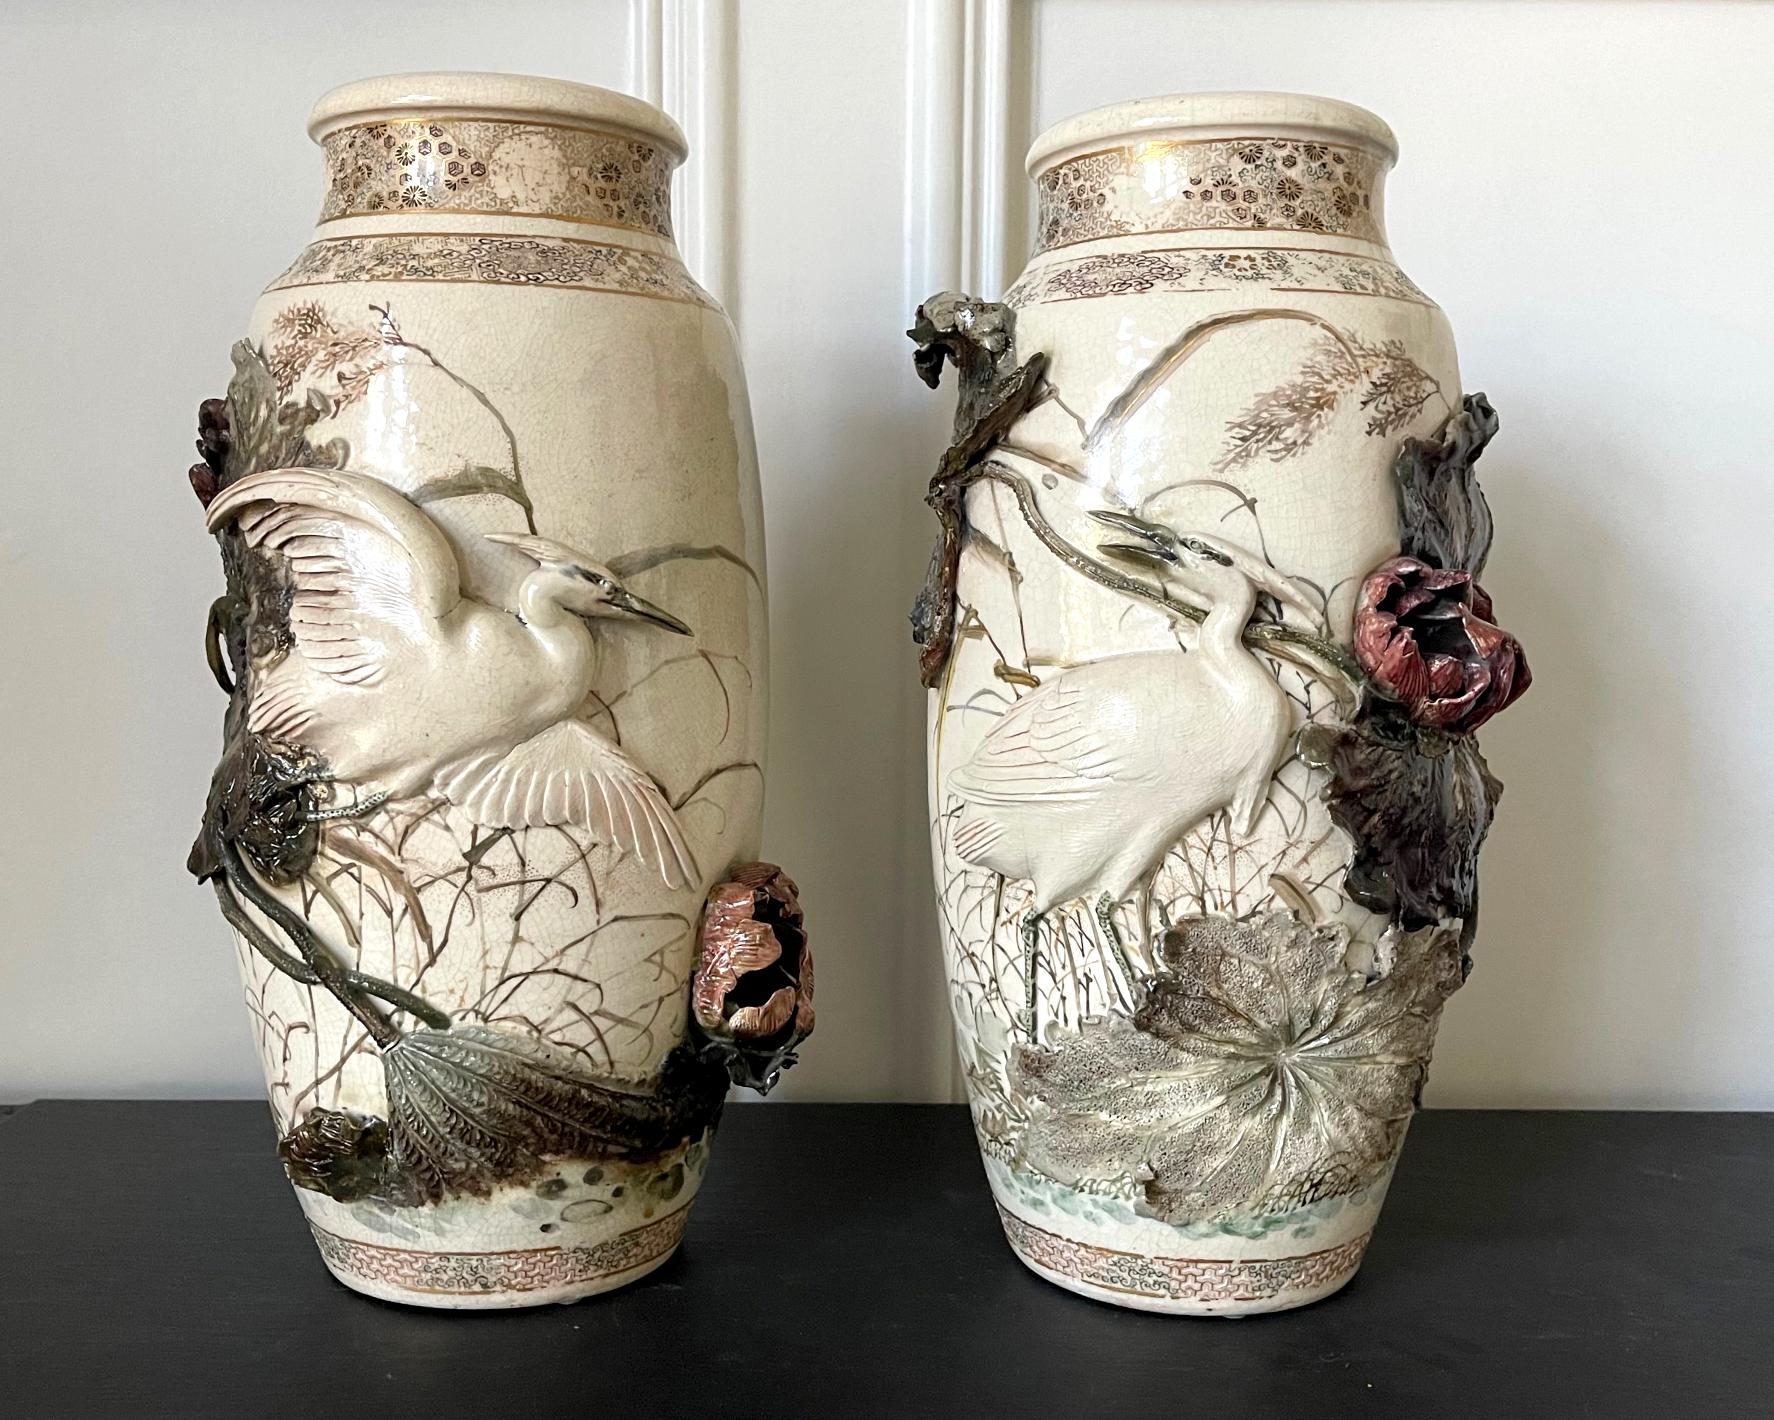 A stunning pair of ceramic vases with gilt, paint and high-relief decoration by imperial artist Makuzu Kozan (1842-1916, also known as Miyagawa Kozan) circa 1876-81 (late Meiji period). These vases belong to early period (1876-1881) of Kozan's